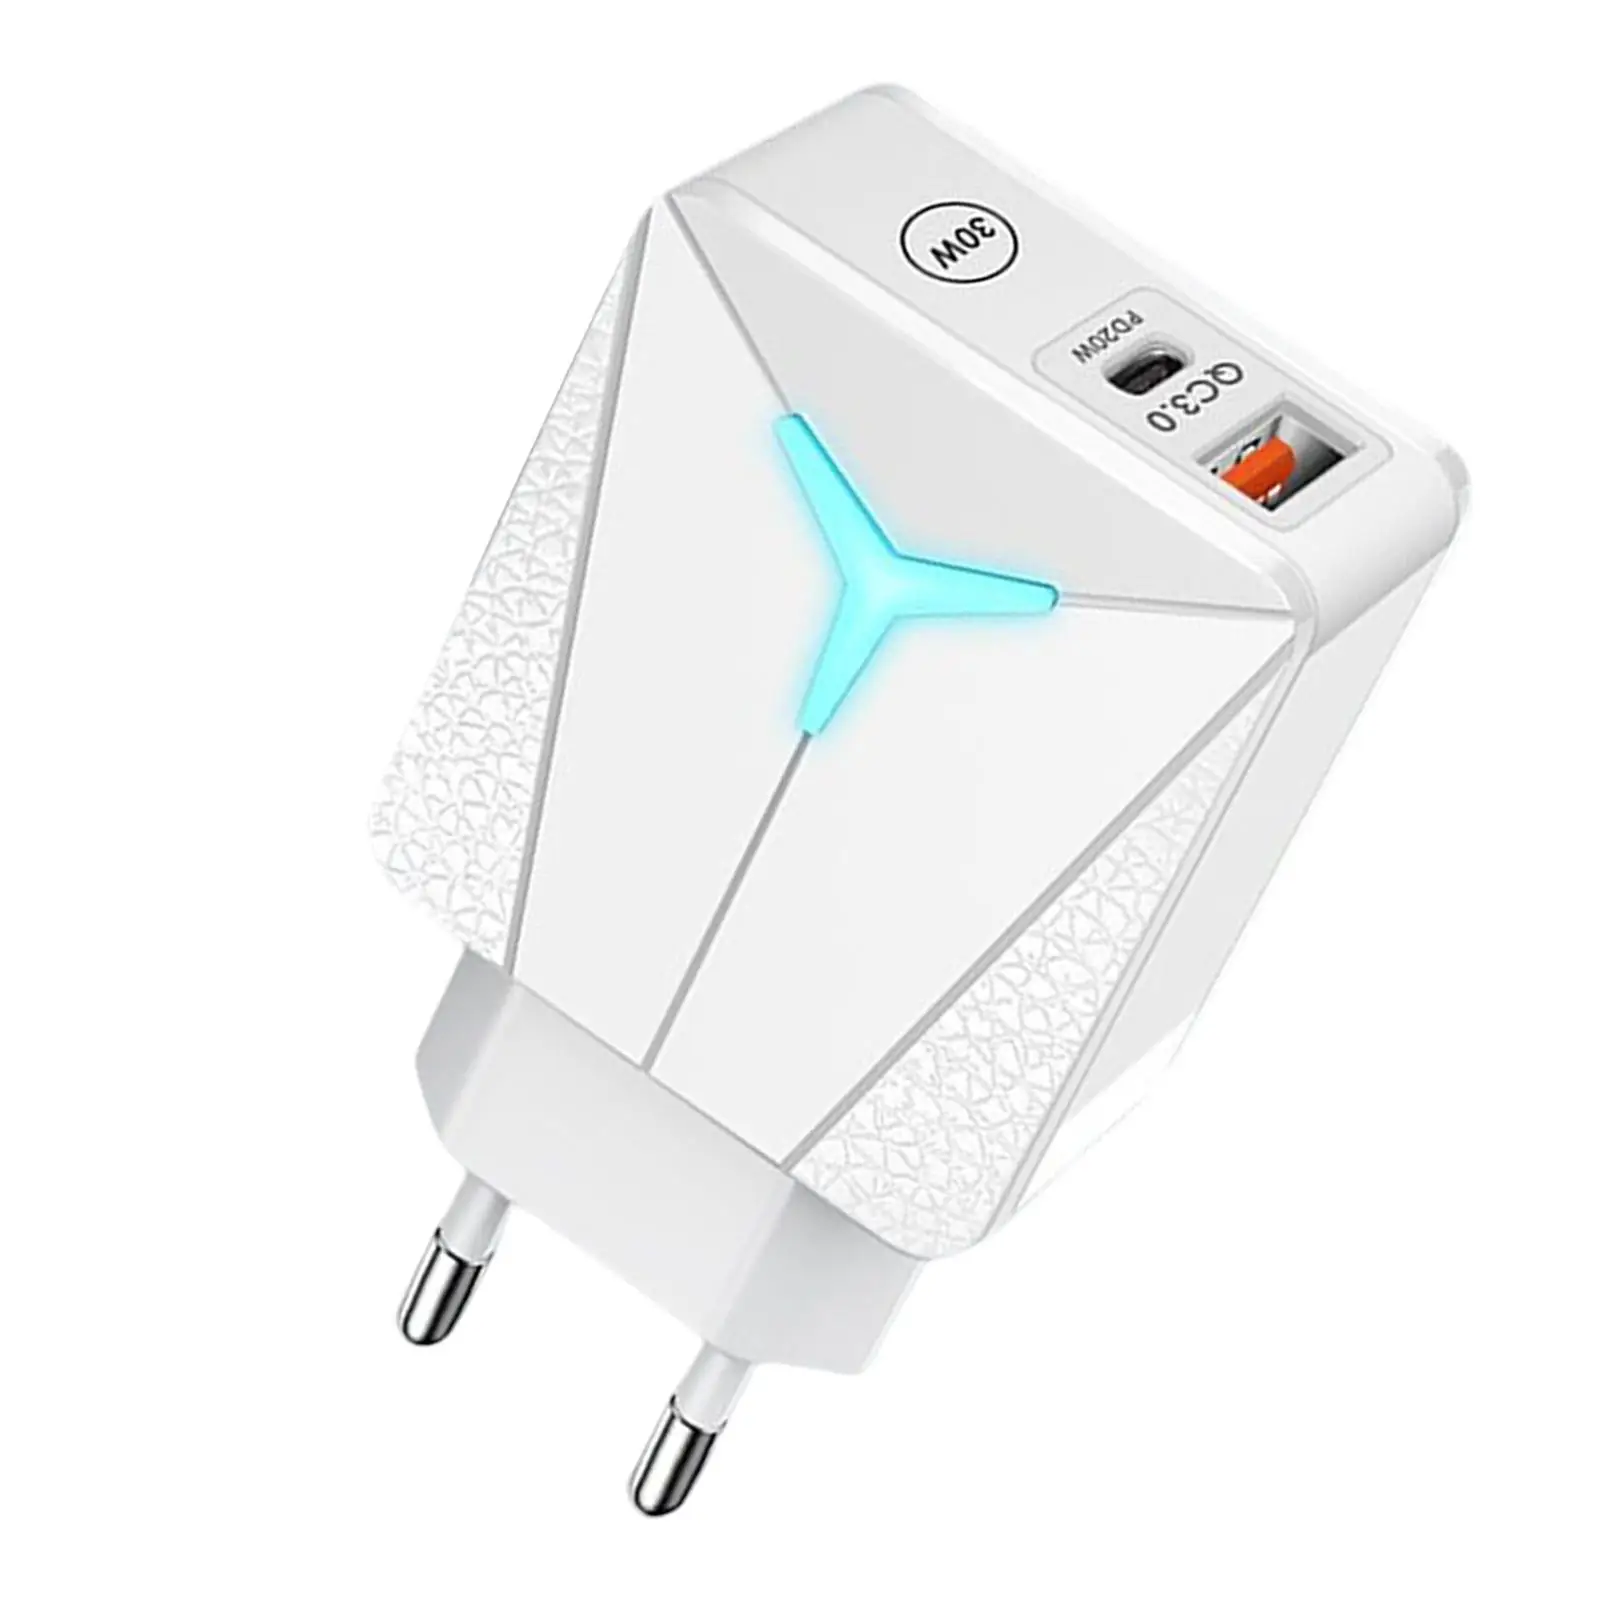 Phone Charger Adapter Compact Dual Port Quick Charging Converter USB 5V / 4A 9V / 2.4A 12V / 1.8A Charging Block for Home Use